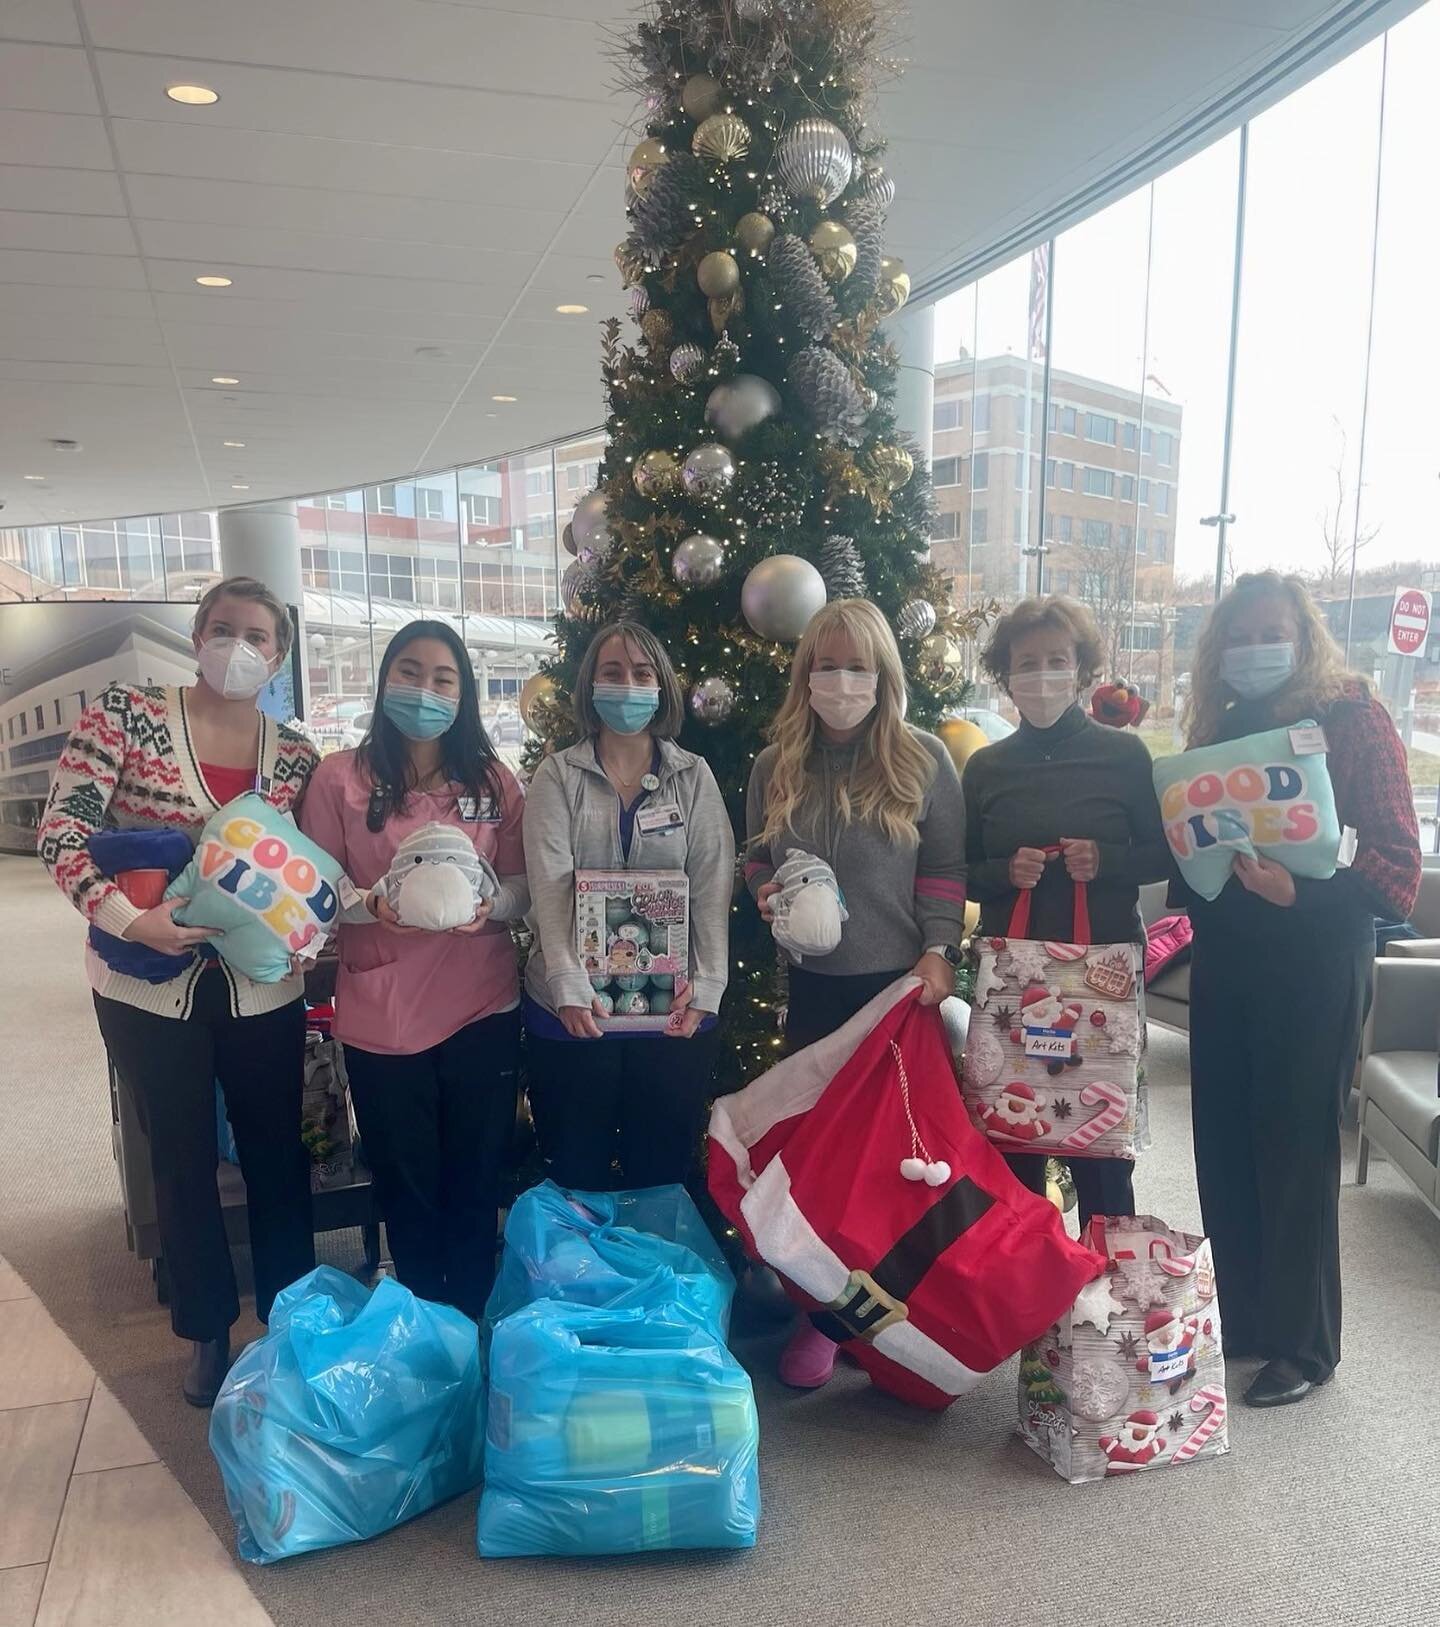 &quot;Twas the day before Christmas Eve...The Bass Foundation happily donates various comfort items including colorful blankets, pillows, art kits and plenty of toys to the children in the pediatric unit. Thank you to @coopermanbarnabas and staff fro